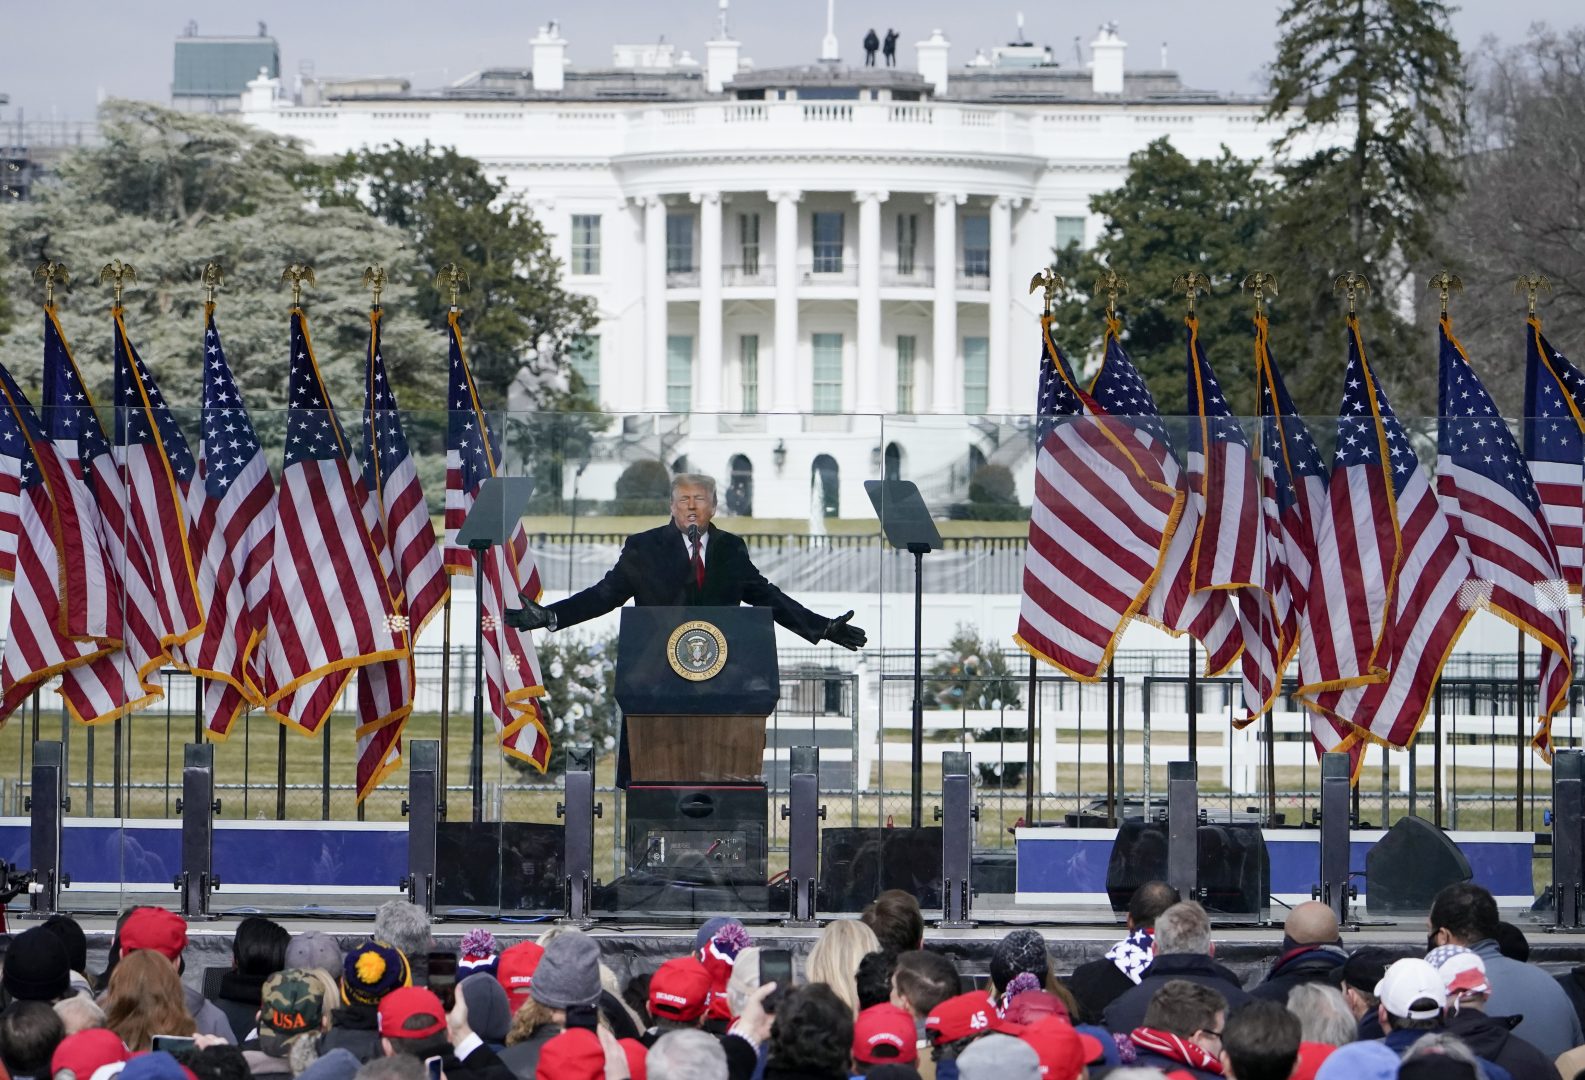 FILE - The White House in the background, President Donald Trump speaks at a rally in Washington, Jan. 6, 2021. The House committee investigating the U.S. Capitol insurrection is asking Ivanka Trump, daughter of former President Donald Trump, to voluntarily cooperate with its investigation.  (AP Photo/Jacquelyn Martin, File)